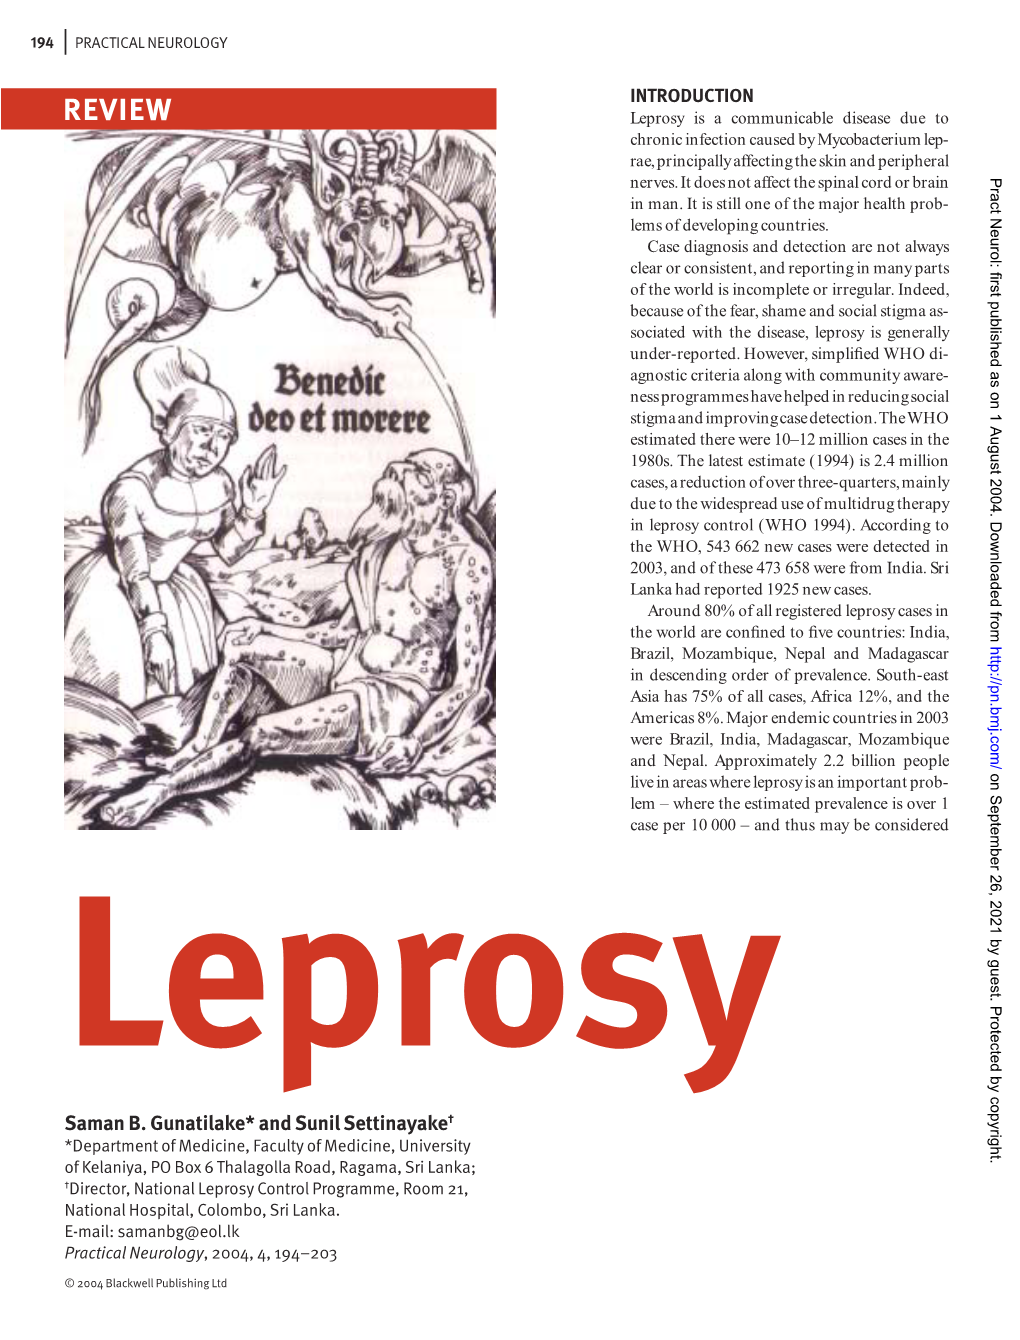 REVIEW Leprosy Is a Communicable Disease Due to Chronic Infection Caused by Mycobacterium Lep- Rae, Principally Affecting the Skin and Peripheral Nerves